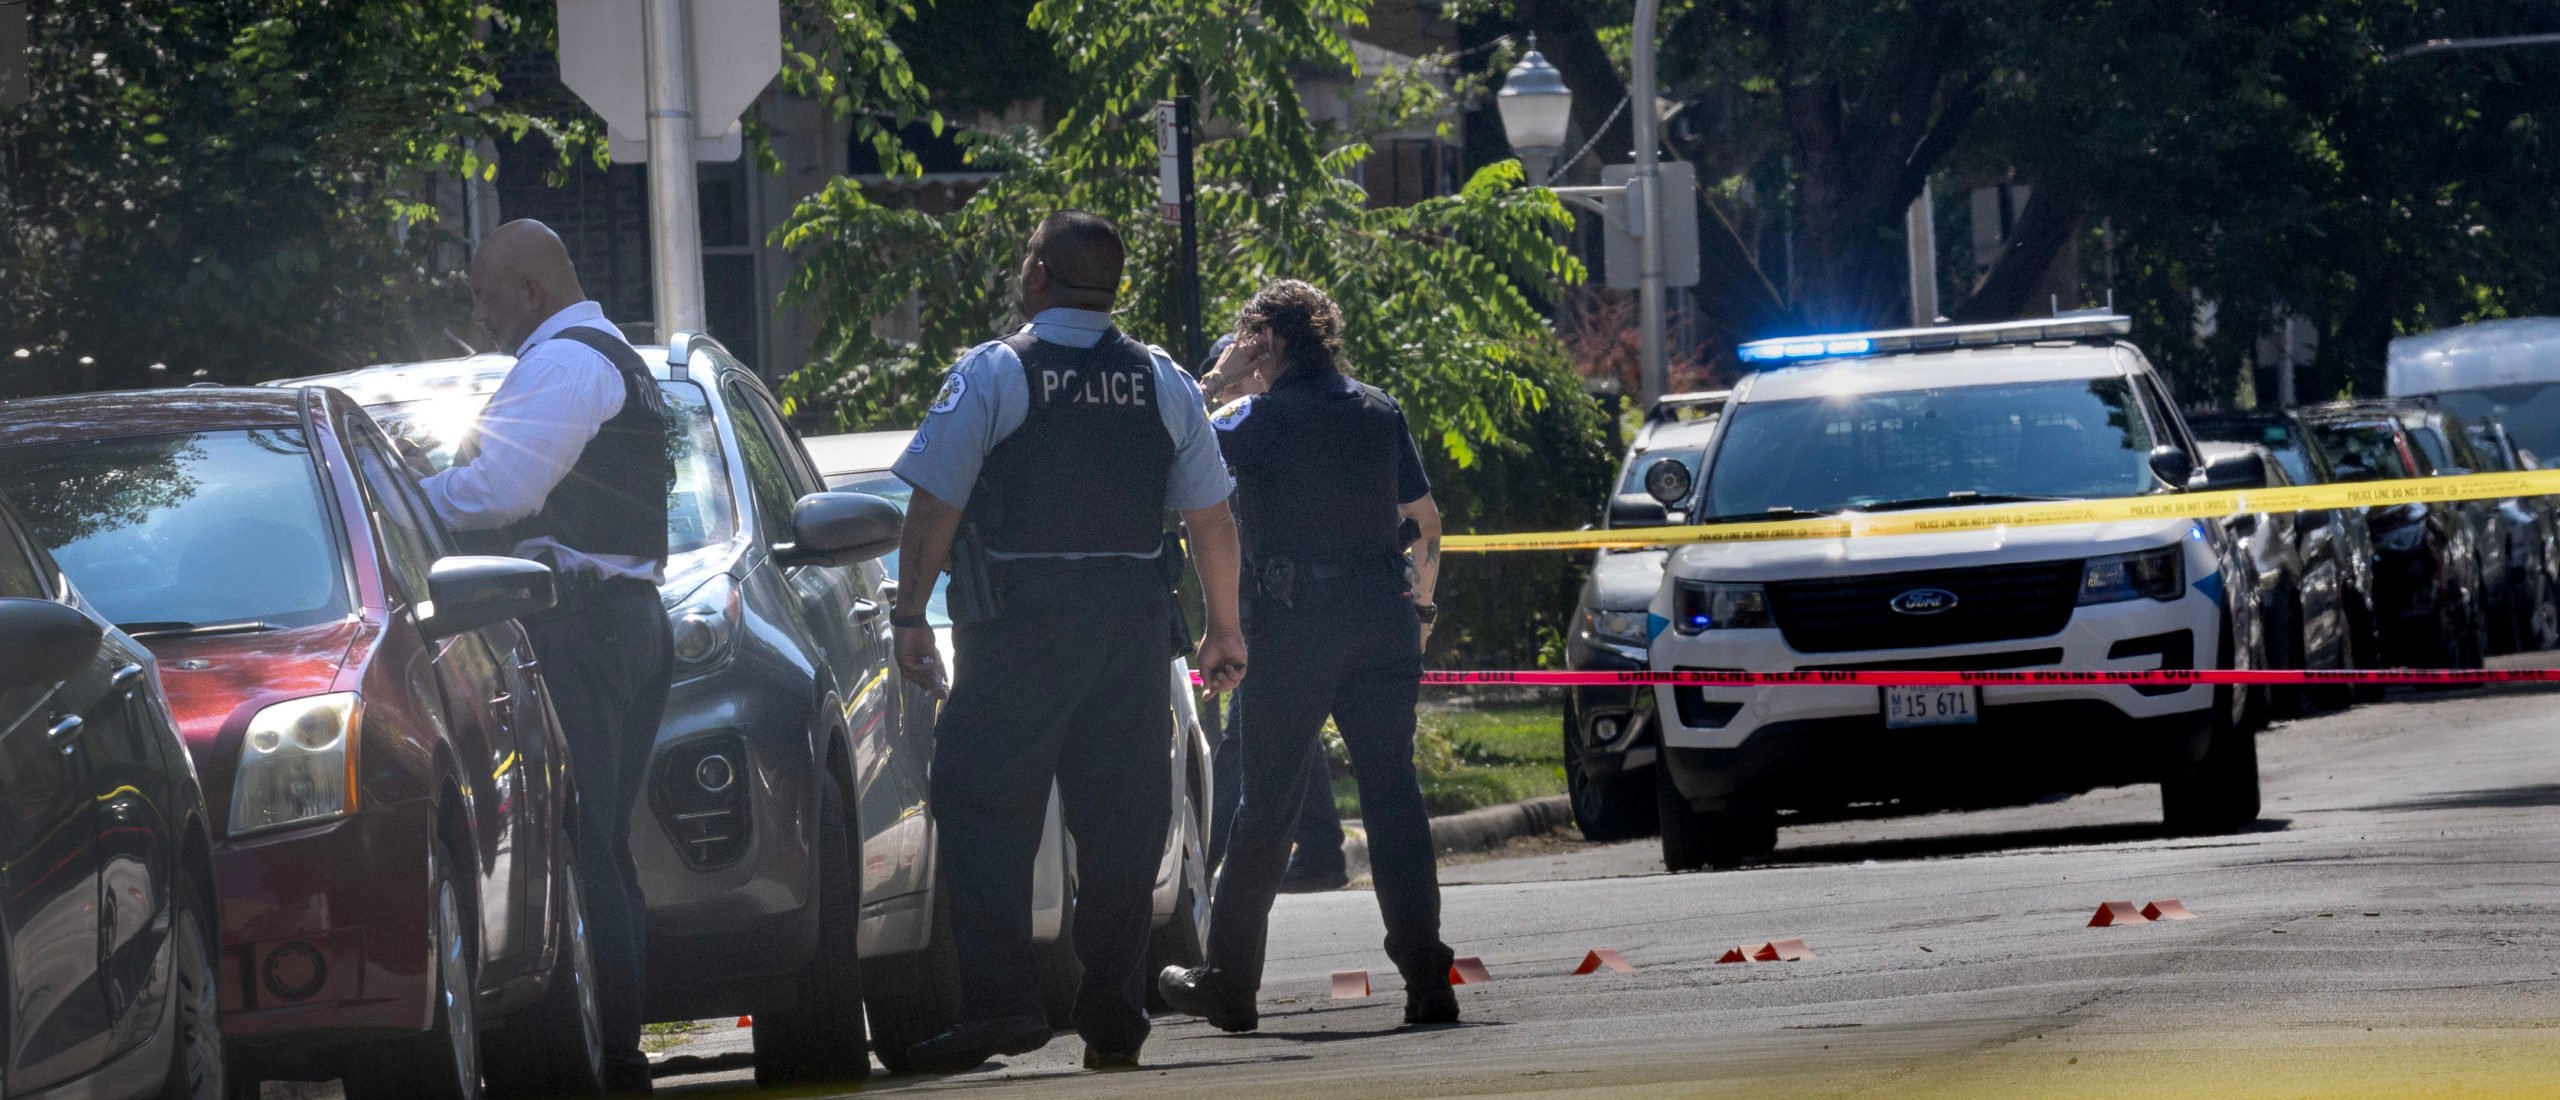 Police investigate the scene of a drive-by shooting on July 06, 2024 in Chicago, Illinois. At least 103 people were shot, 19 fatally, in gun violence in the city over the long Fourth of July holiday weekend. (Photo by Scott Olson/Getty Images)